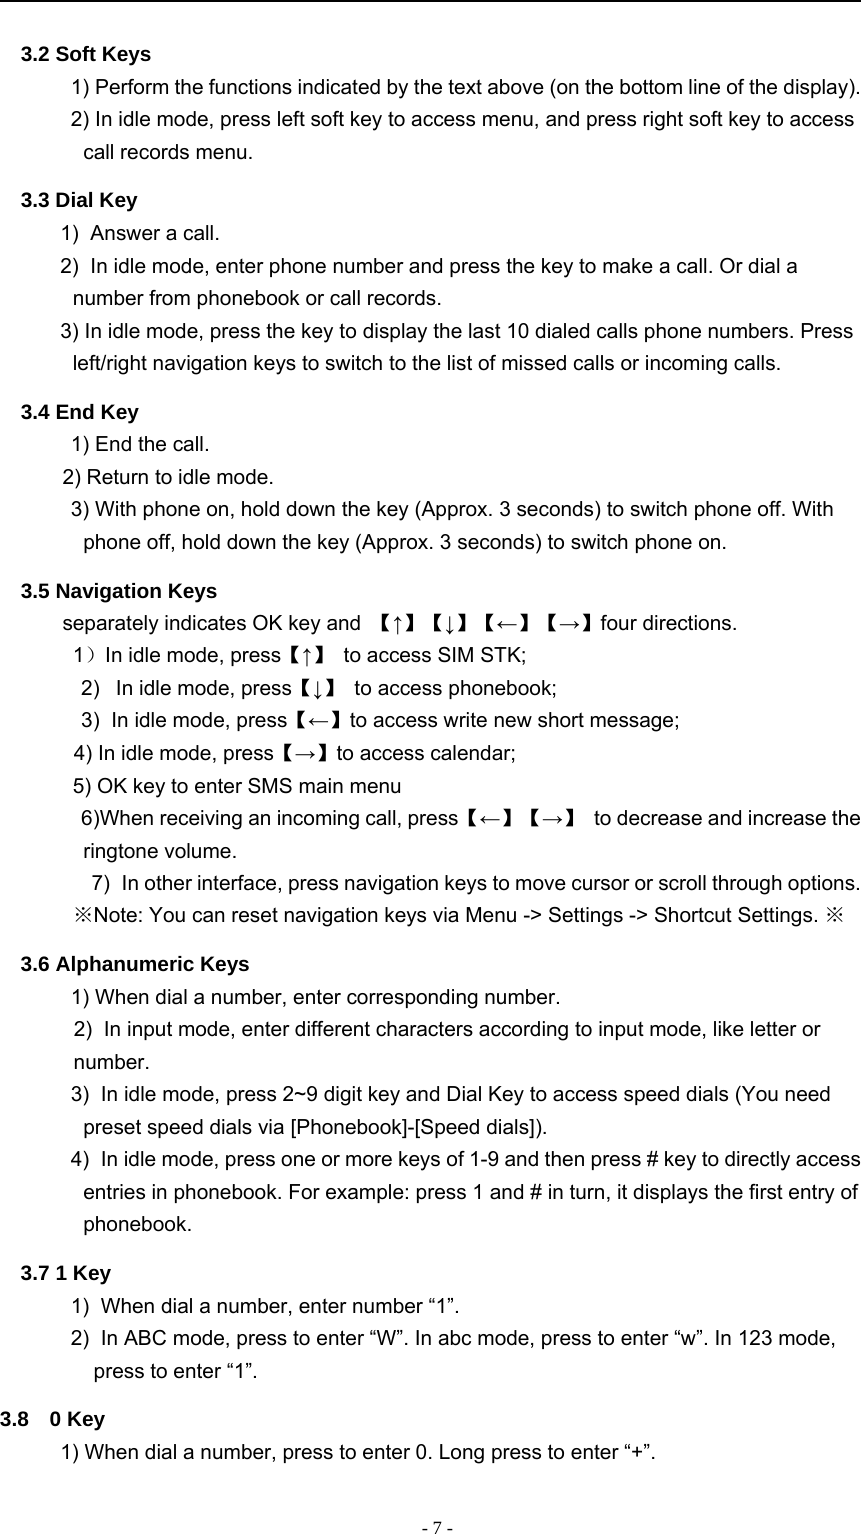 -7-3.2 Soft Keys1) Perform the functions indicated by the text above (on the bottom line of the display).2) In idle mode, press left soft key to access menu, and press right soft key to accesscall records menu.3.3 Dial Key1) Answer a call.2) In idle mode, enter phone number and press the key to make a call. Or dial anumber from phonebook or call records.3) In idle mode, press the key to display the last 10 dialed calls phone numbers. Pressleft/right navigation keys to switch to the list of missed calls or incoming calls.3.4 End Key1) End the call.2) Return to idle mode.3) With phone on, hold down the key (Approx. 3 seconds) to switch phone off. Withphone off, hold down the key (Approx. 3 seconds) to switch phone on.3.5 Navigation Keysseparately indicates OK key and 【↑】【↓】【←】【→】four directions.1）In idle mode, press【↑】to access SIM STK;2) In idle mode, press【↓】to access phonebook;3) In idle mode, press【←】to access write new short message;4) In idle mode, press【→】to access calendar;5) OK key to enter SMS main menu6)When receiving an incoming call, press【←】【→】to decrease and increase theringtone volume.7) In other interface, press navigation keys to move cursor or scroll through options.※Note: You can reset navigation keys via Menu -&gt; Settings -&gt; Shortcut Settings. ※3.6 Alphanumeric Keys1) When dial a number, enter corresponding number.2) In input mode, enter different characters according to input mode, like letter ornumber.3) In idle mode, press 2~9 digit key and Dial Key to access speed dials (You needpreset speed dials via [Phonebook]-[Speed dials]).4) In idle mode, press one or more keys of 1-9 and then press # key to directly accessentries in phonebook. For example: press 1 and # in turn, it displays the first entry ofphonebook.3.7 1 Key1) When dial a number, enter number “1”.2) In ABC mode, press to enter “W”. In abc mode, press to enter “w”. In 123 mode,press to enter “1”.3.8 0 Key1) When dial a number, press to enter 0. Long press to enter “+”.